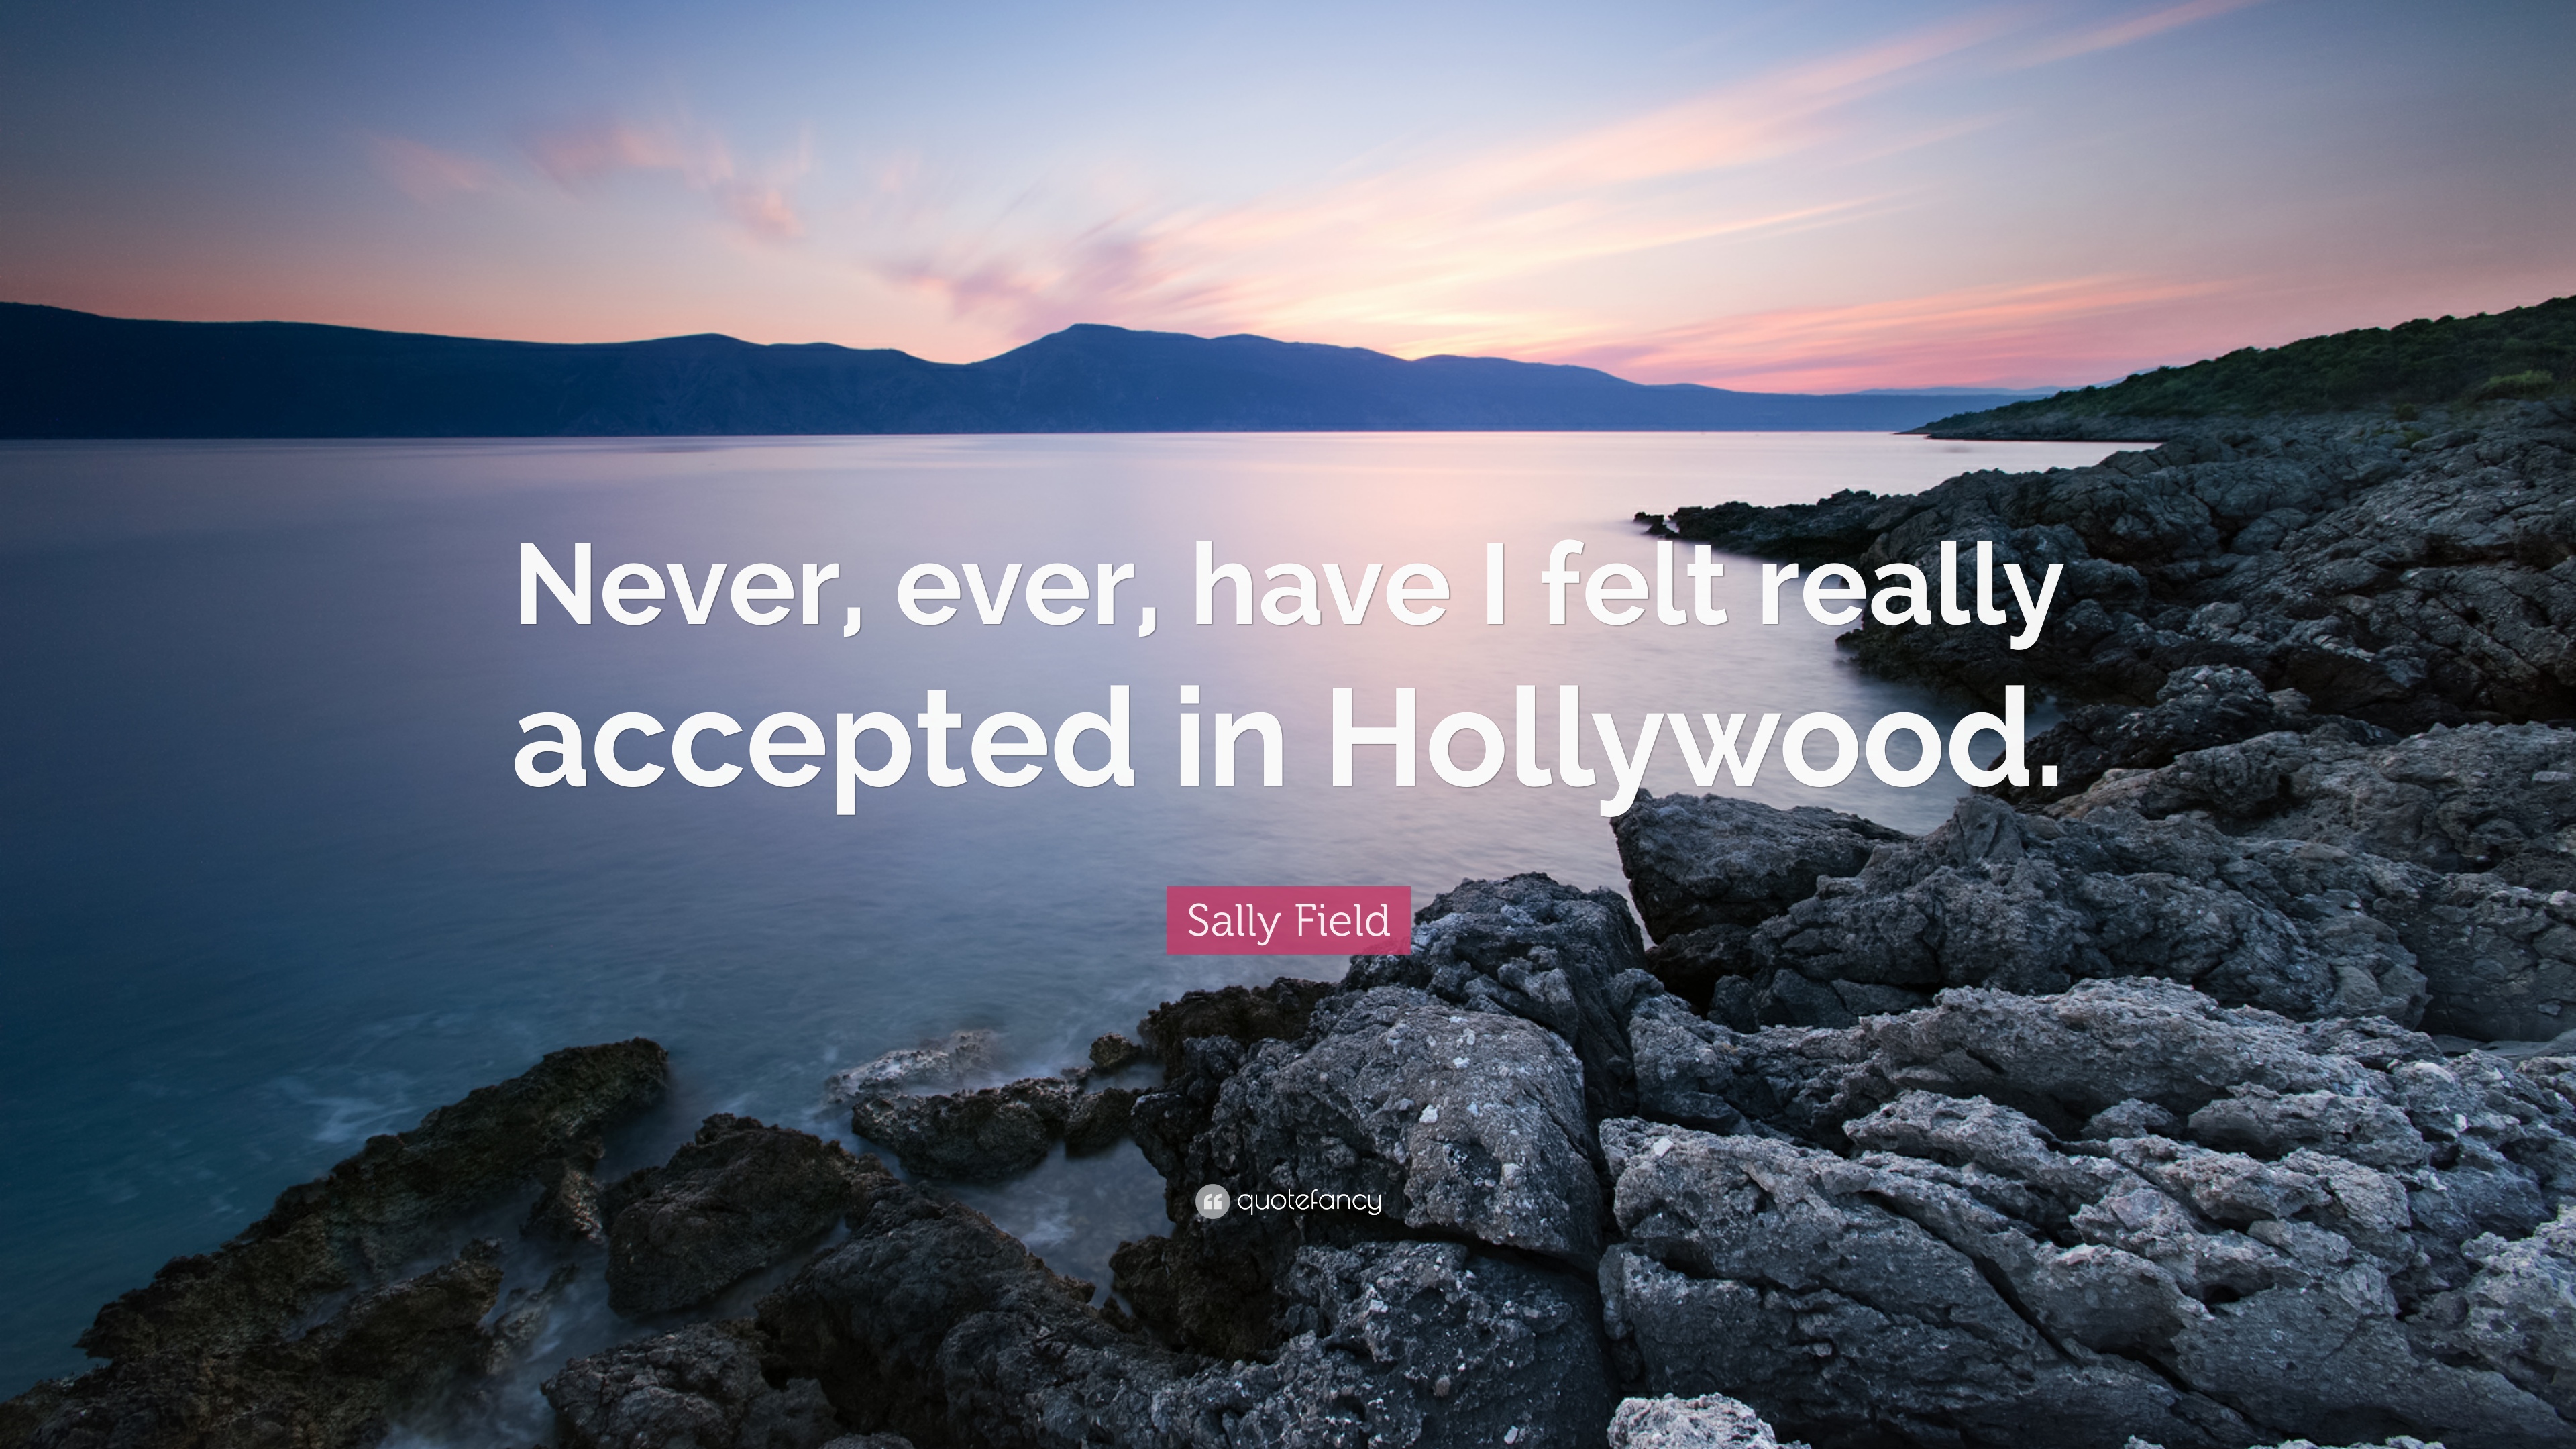 Sally Field Quote: “Never, ever, have I felt really accepted